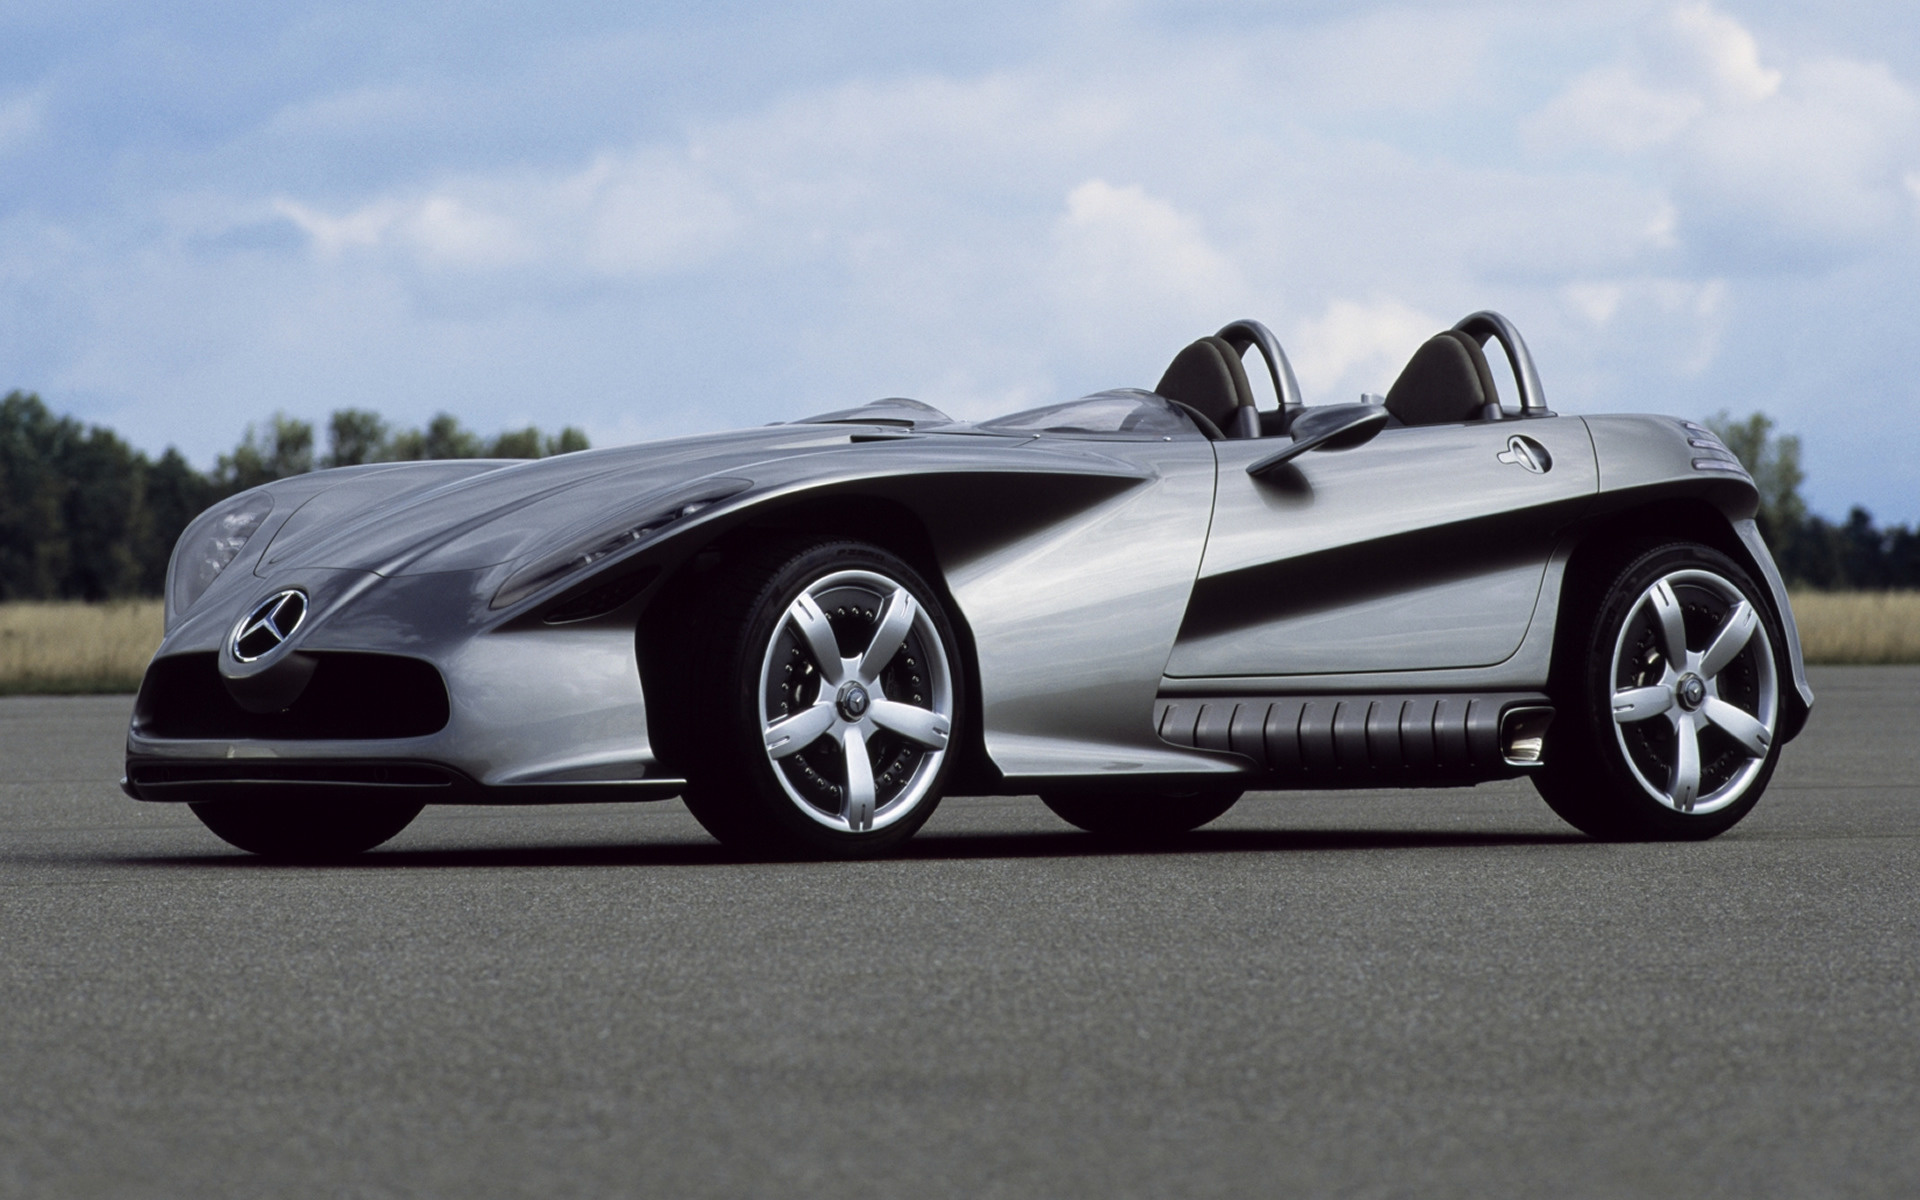 Mercedes-Benz F 400 Carving Concept Wallpapers